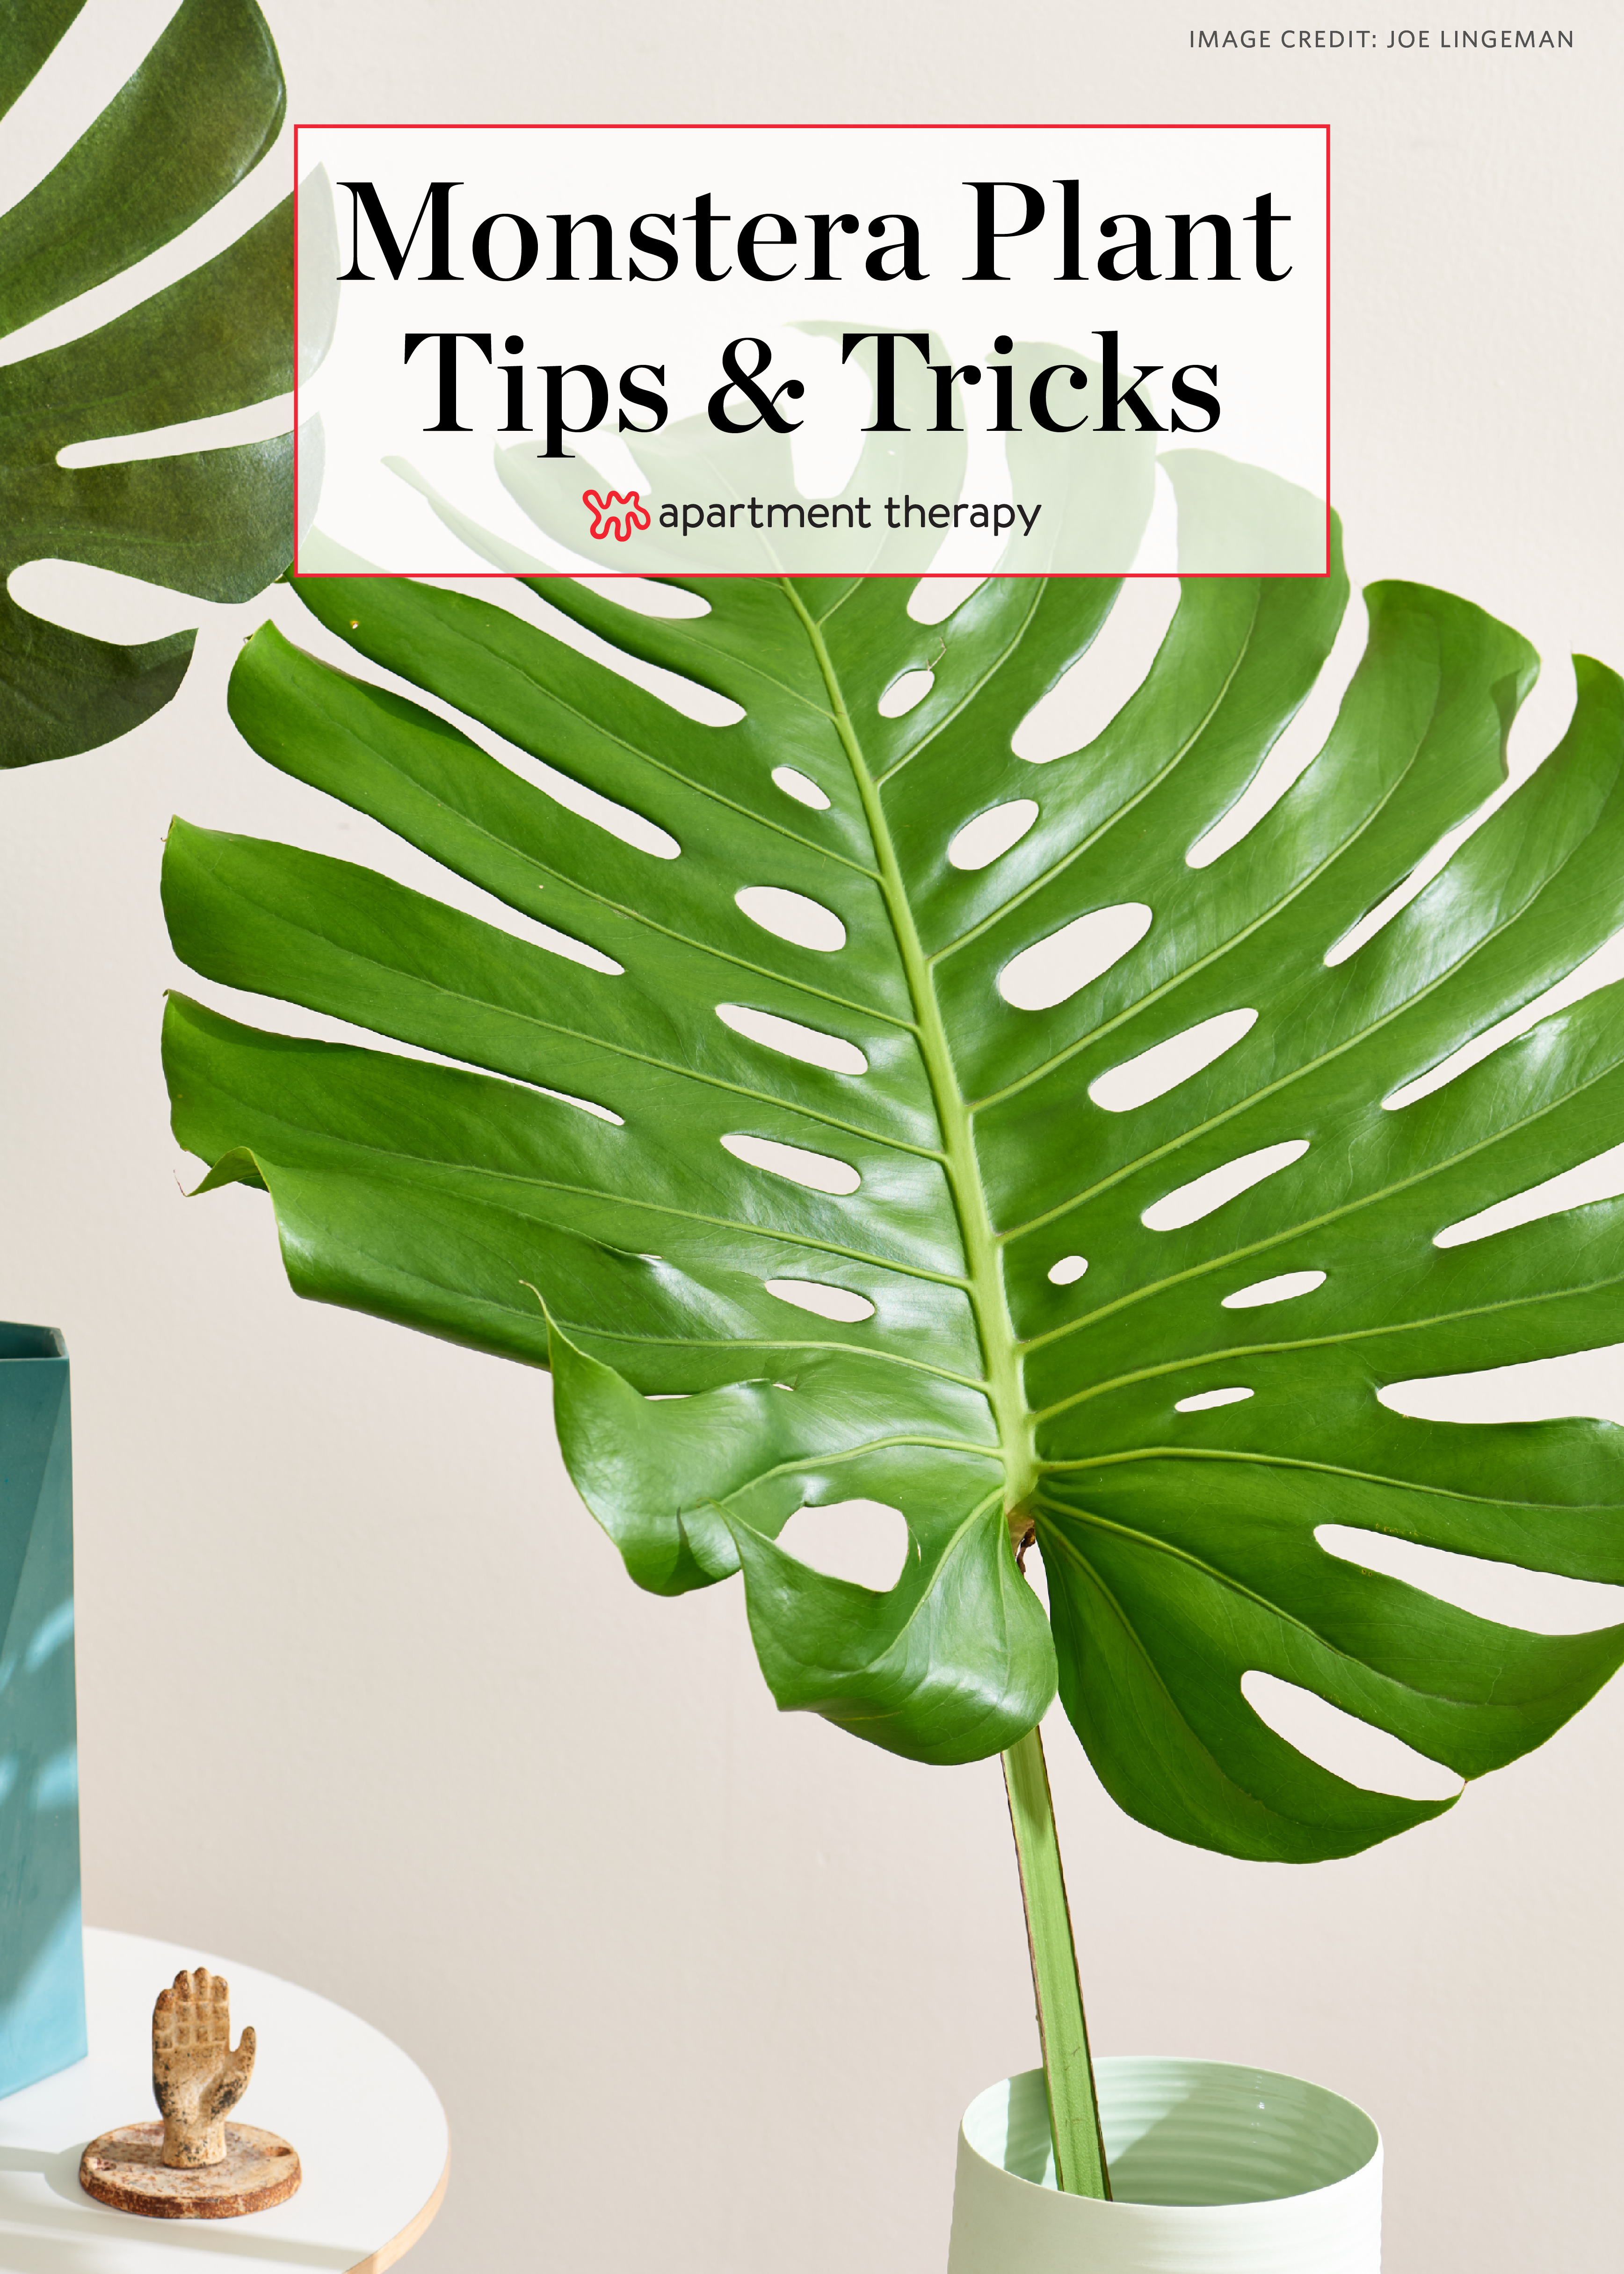 Monstera Deliciosa Plant Care How To Grow Maintain Split Leaf Philodendron Apartment Therapy